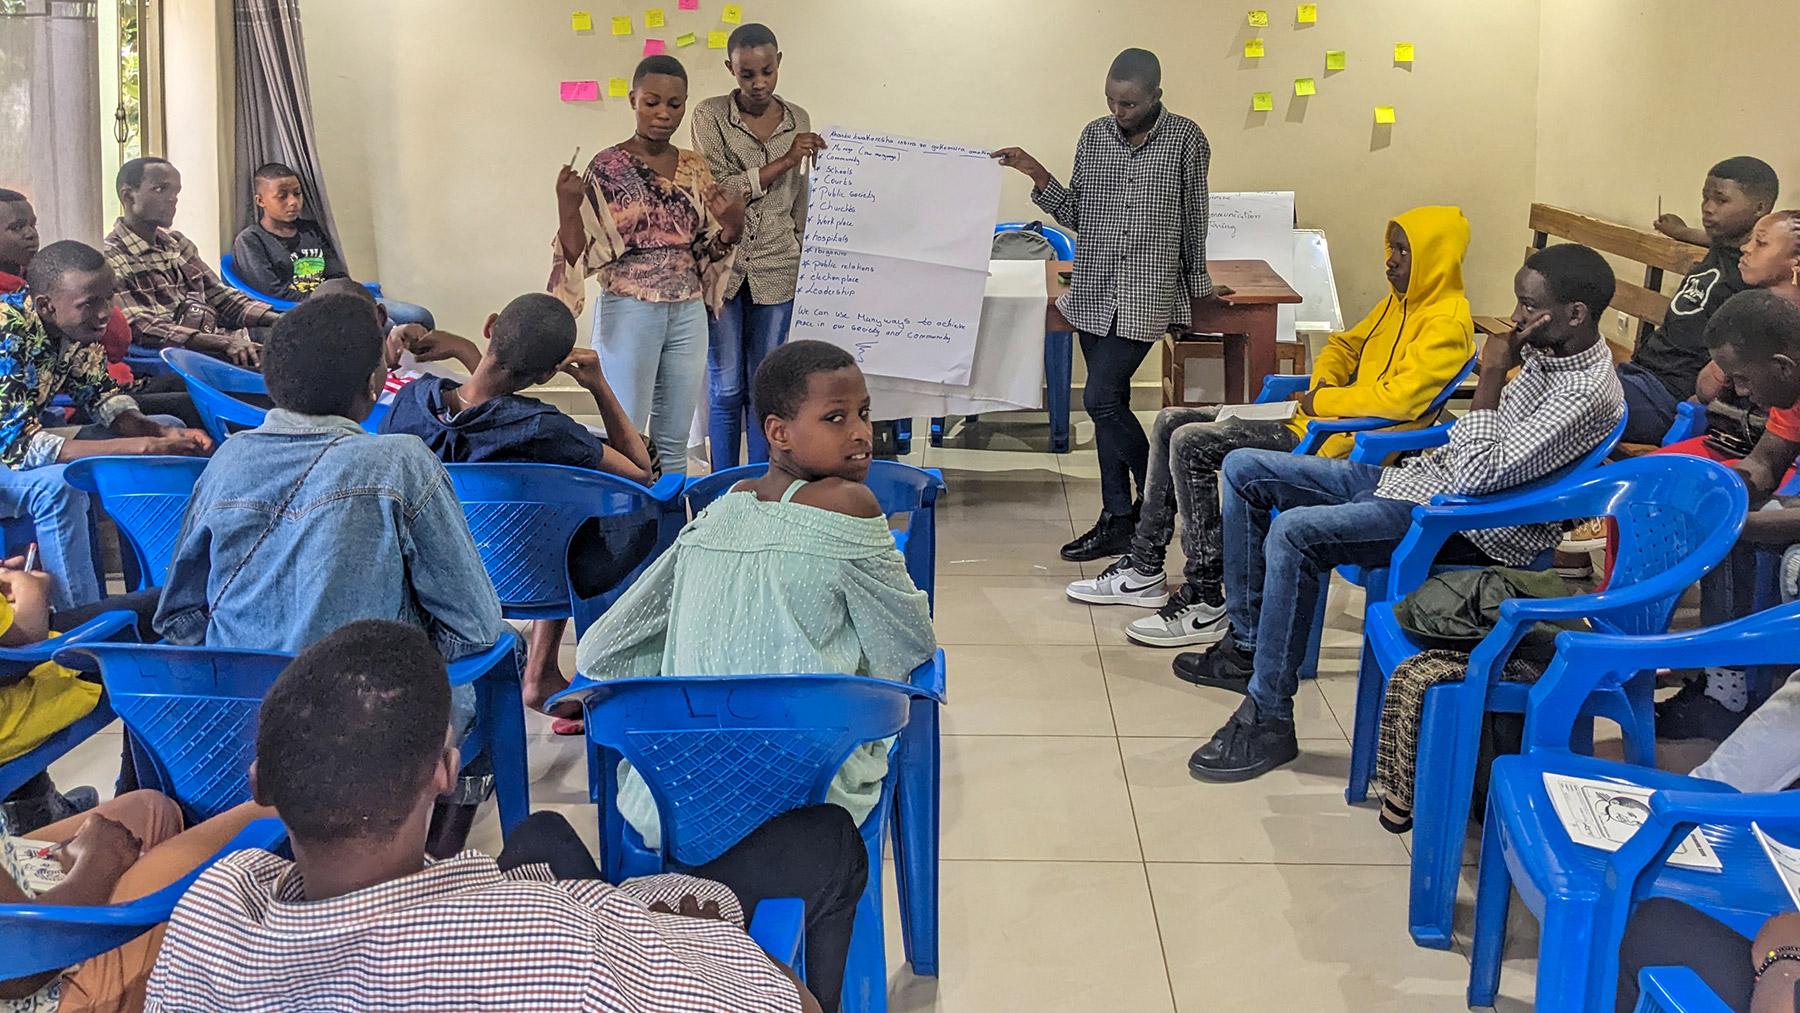 LCR youth in the April 2023 training sharing how they will use the skills gained to promote peace and resolve conflicts. Photo: LCR/ Geoffrey Munyaneza